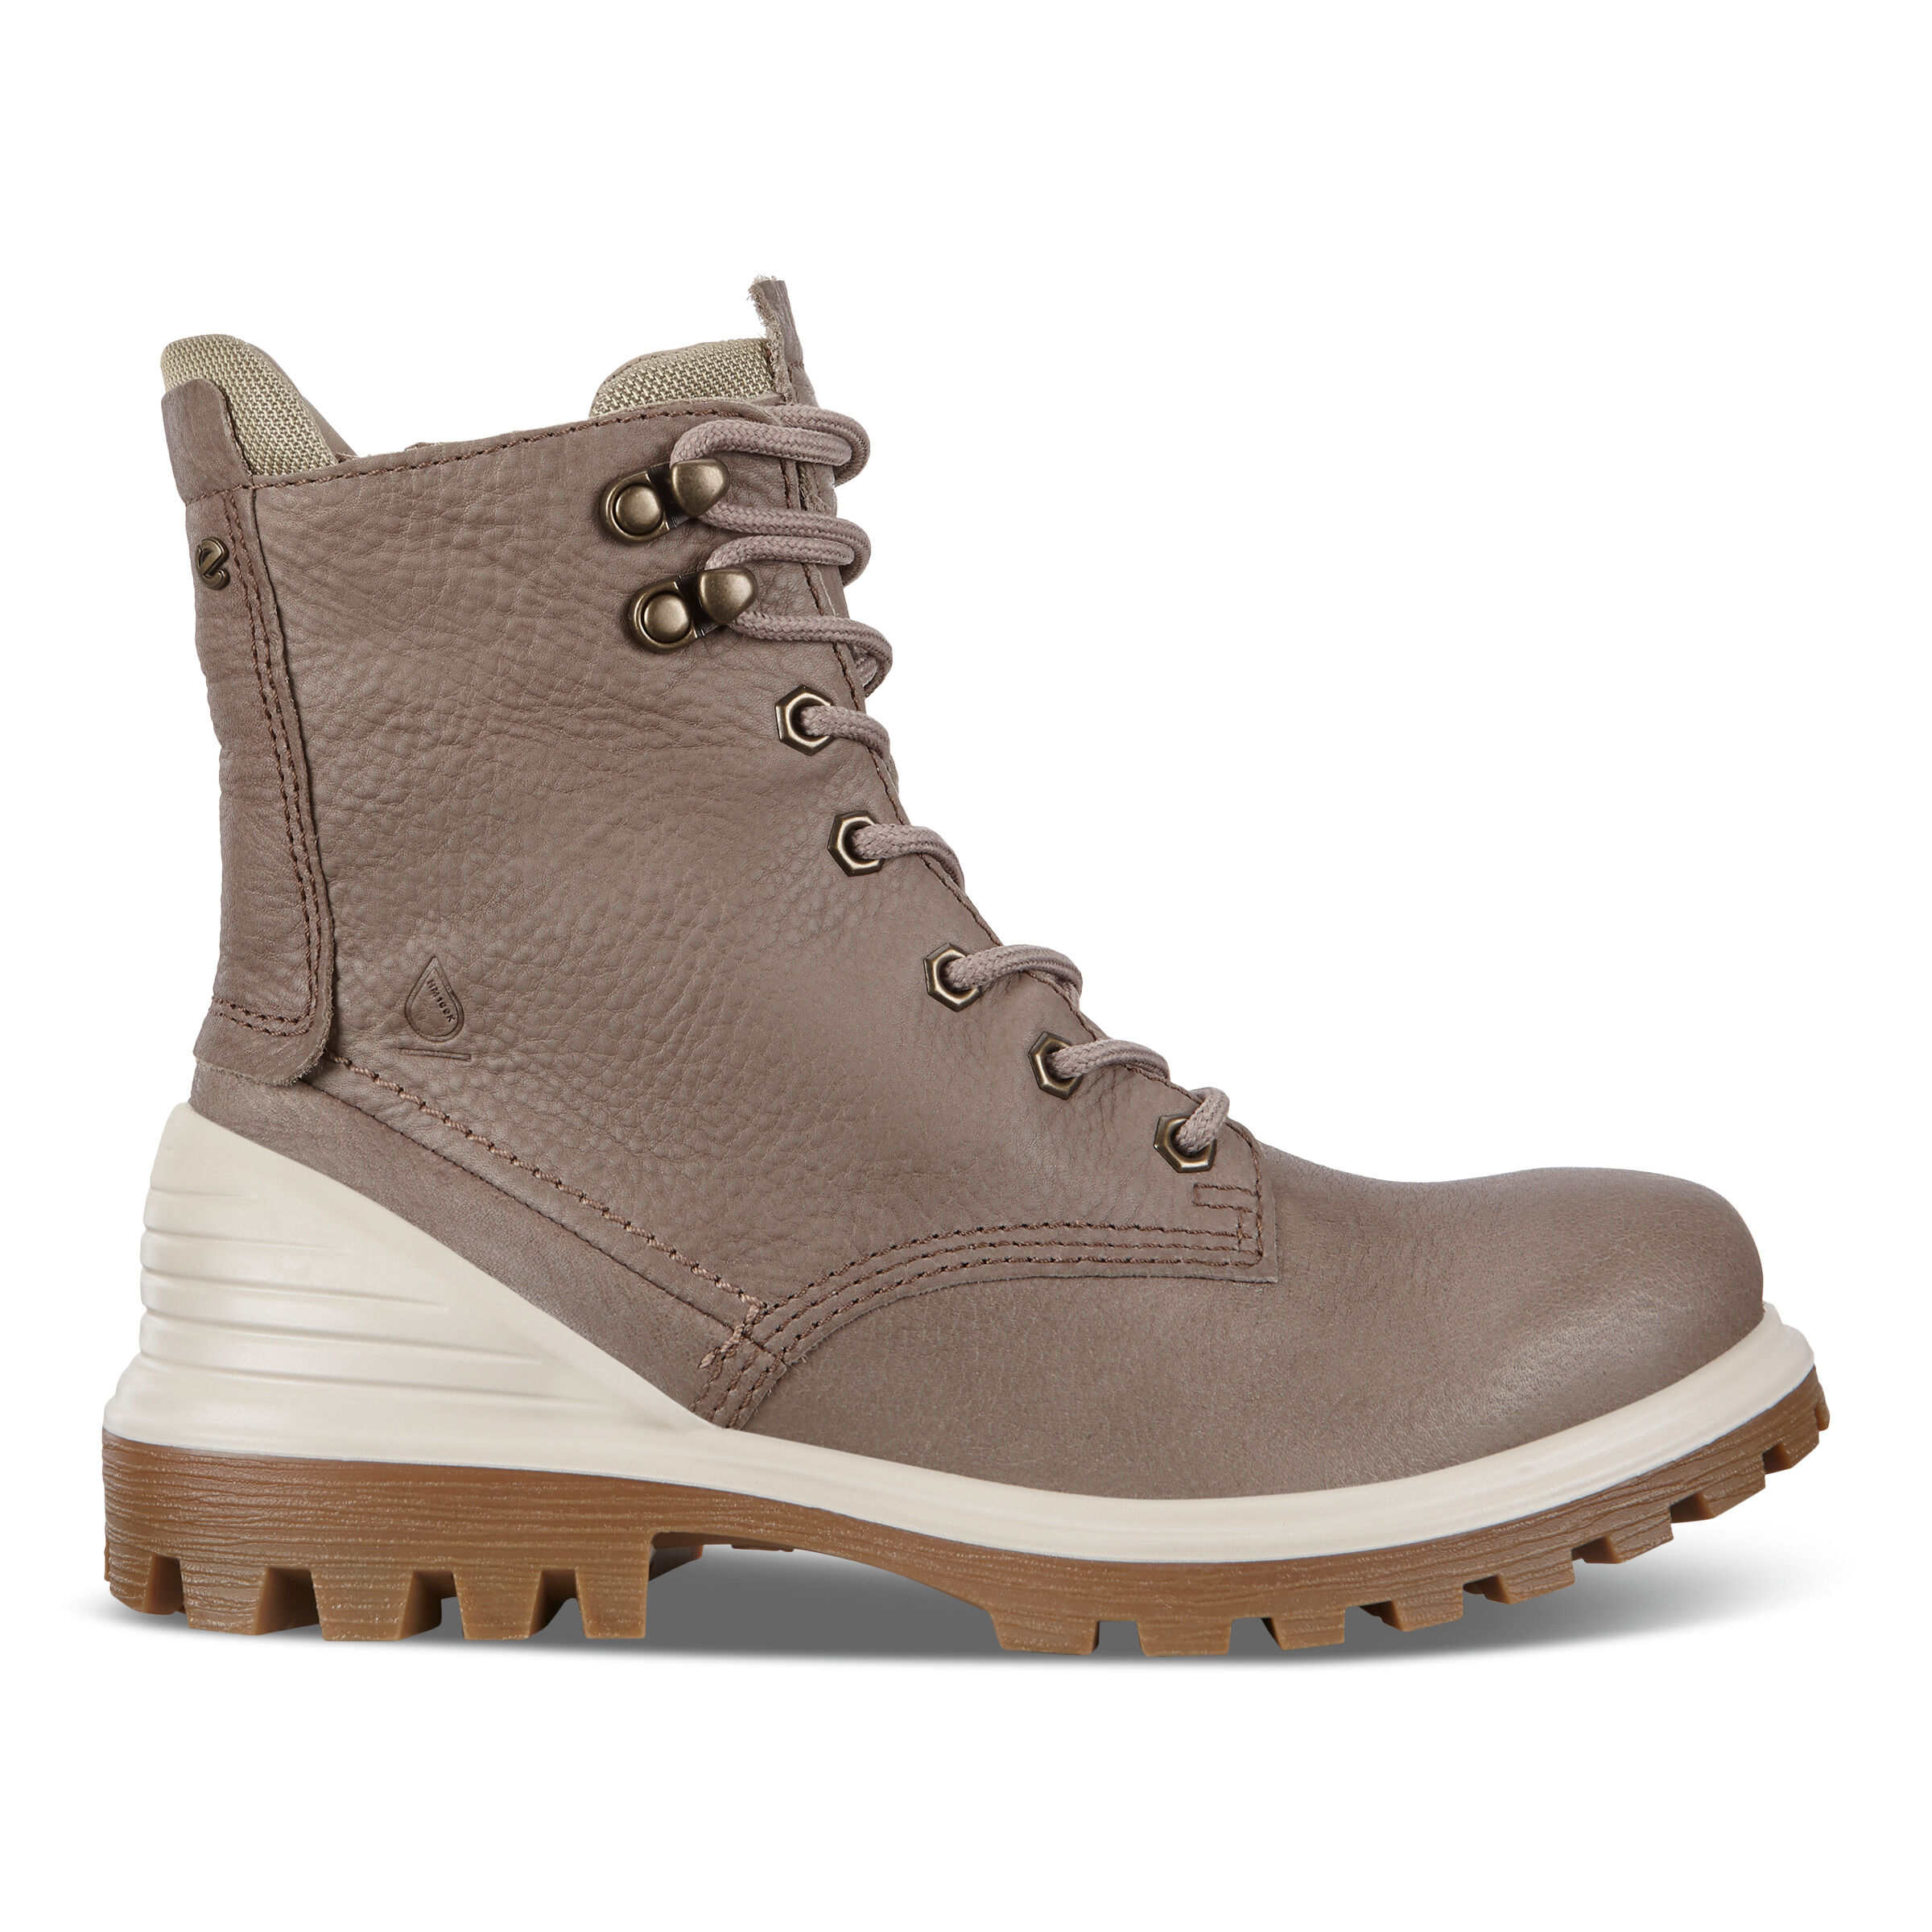 Boot | Women's work boots | ECCO® Shoes